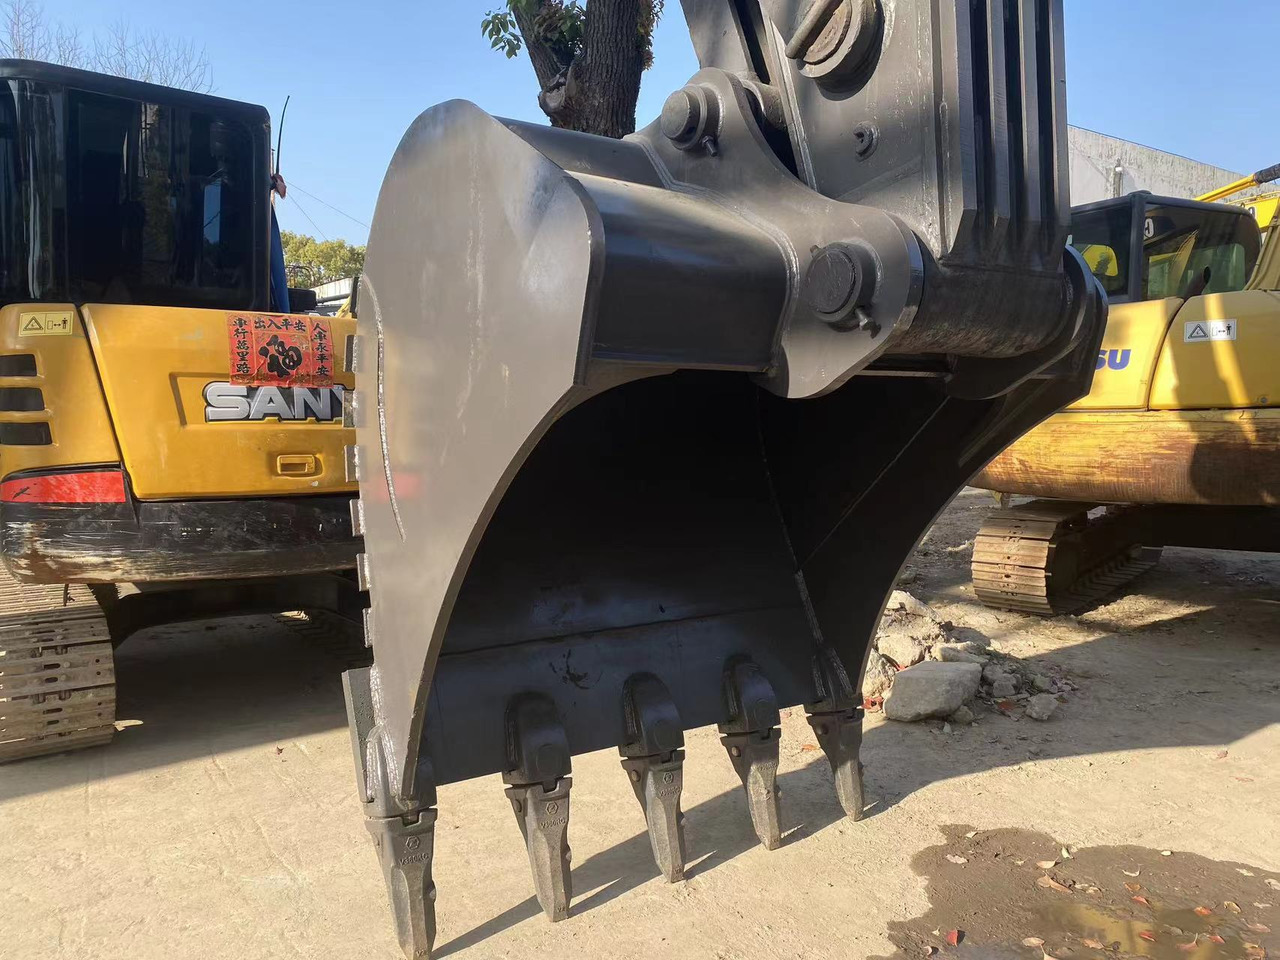 Hot selling original made Used excavator VOLVO EC480DL in stock low price for sale lizing Hot selling original made Used excavator VOLVO EC480DL in stock low price for sale: slika 7